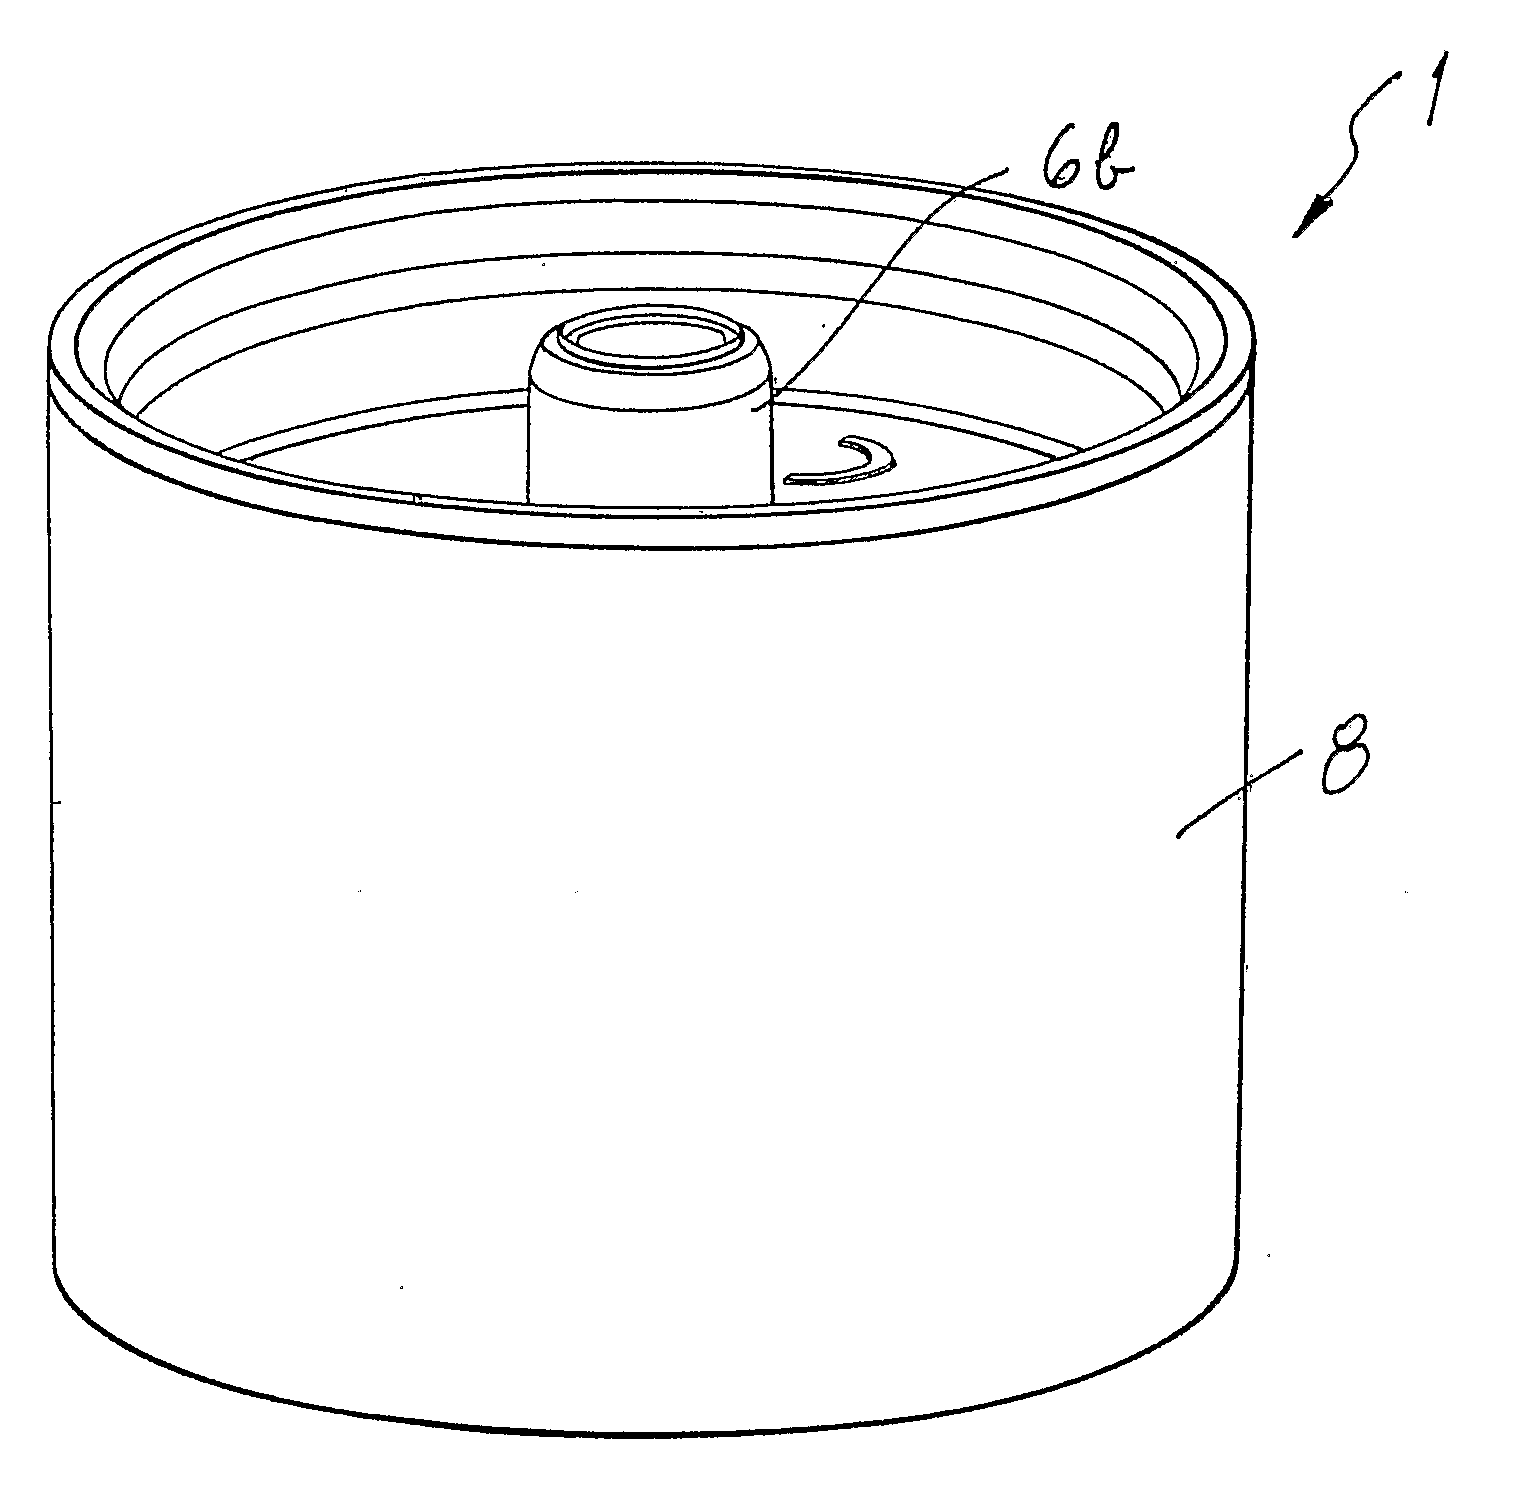 Beverage extraction assembly for extracting a beverage from a particulate substance contained in a cartridge